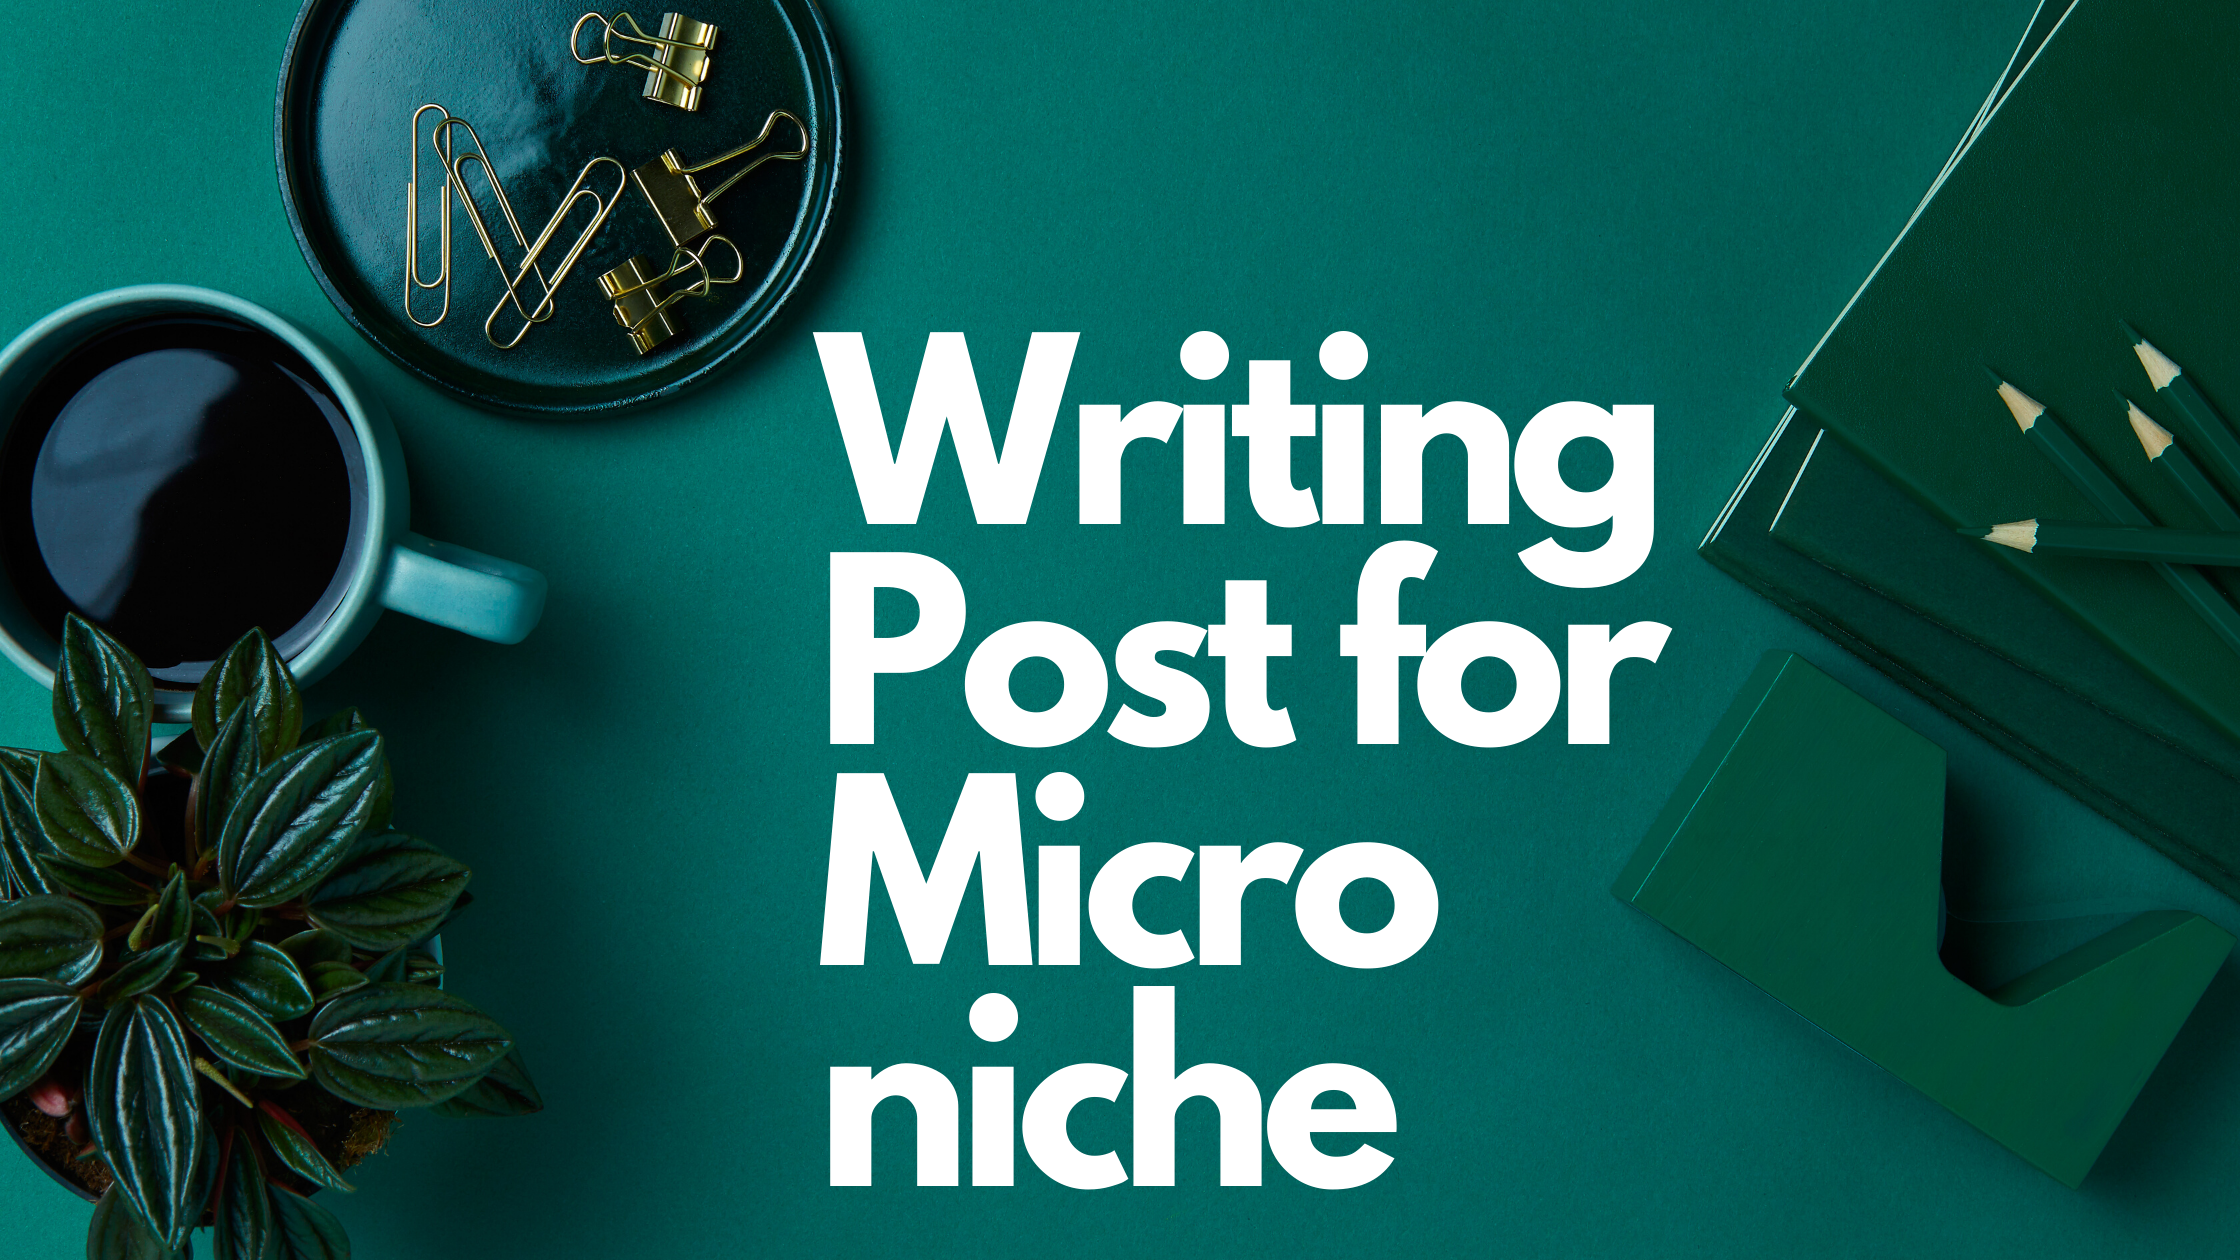 How to make a Micro niche blog & Website